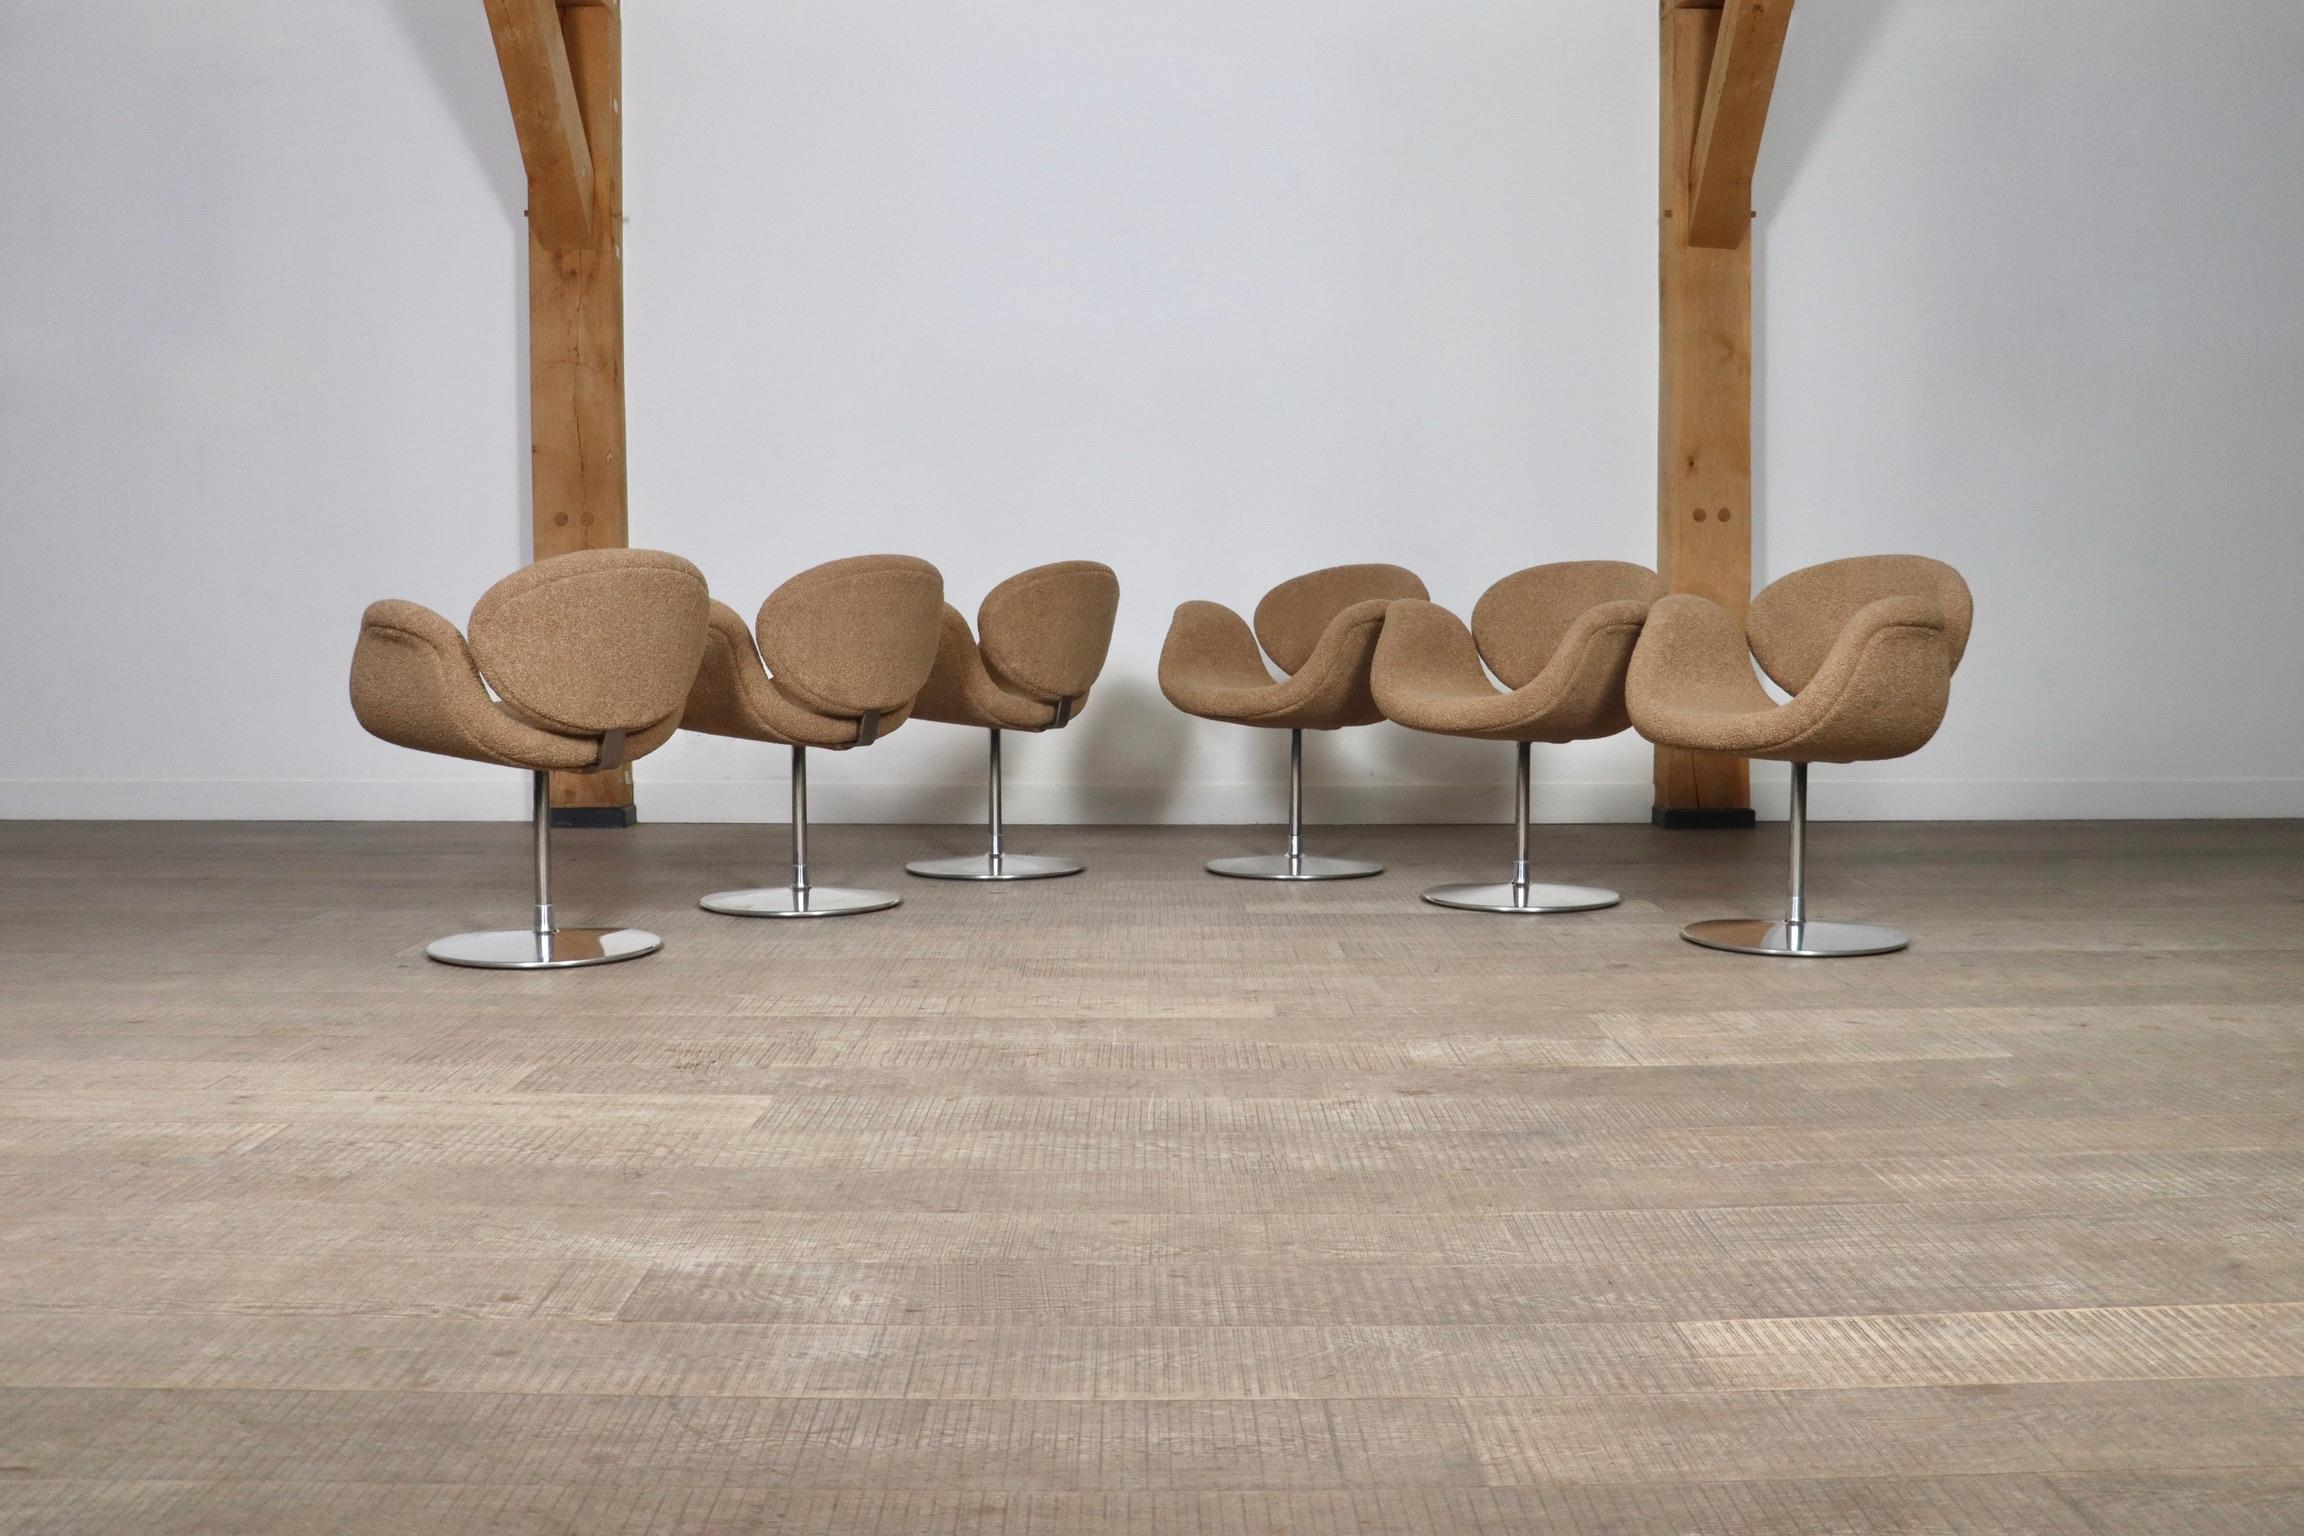 Nice set of 6 swivel dining chairs model Little Tulip by Pierre Paulin for Artifort, reupholstered in a soft beige teddy fabric and a chrome base. This fun, yet highly comfortable design will be a nice addition for any dining room. The padded